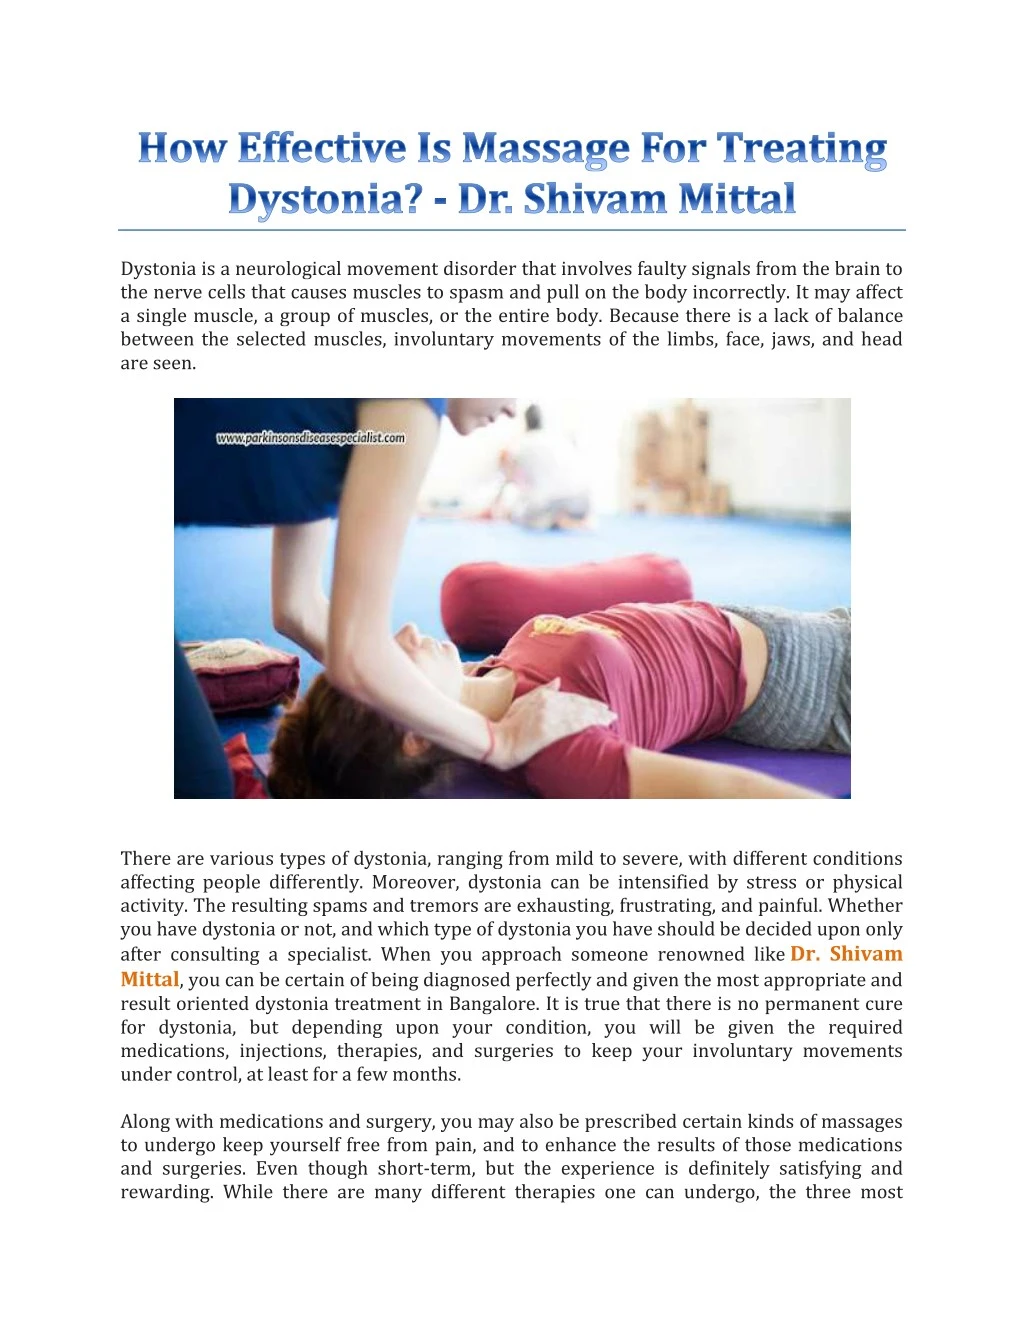 Ppt How Effective Is Massage For Treating Dystonia Dr Shivam Mittal Powerpoint 0437